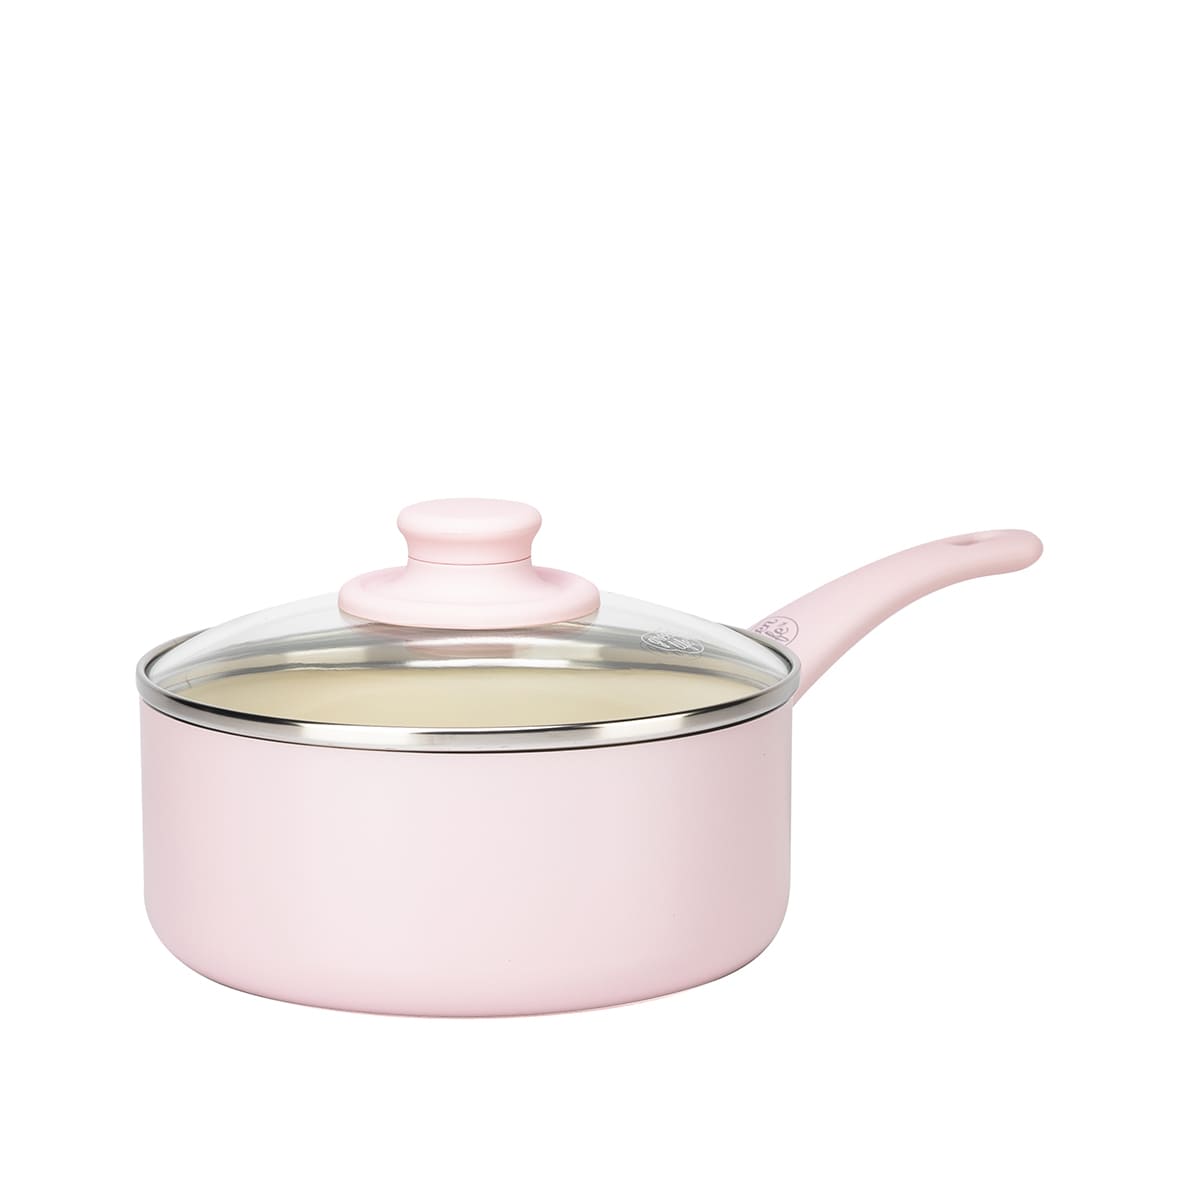 GREENLIFE SOFT GRIP <br> 4PC COOKWARE SETS, PINK